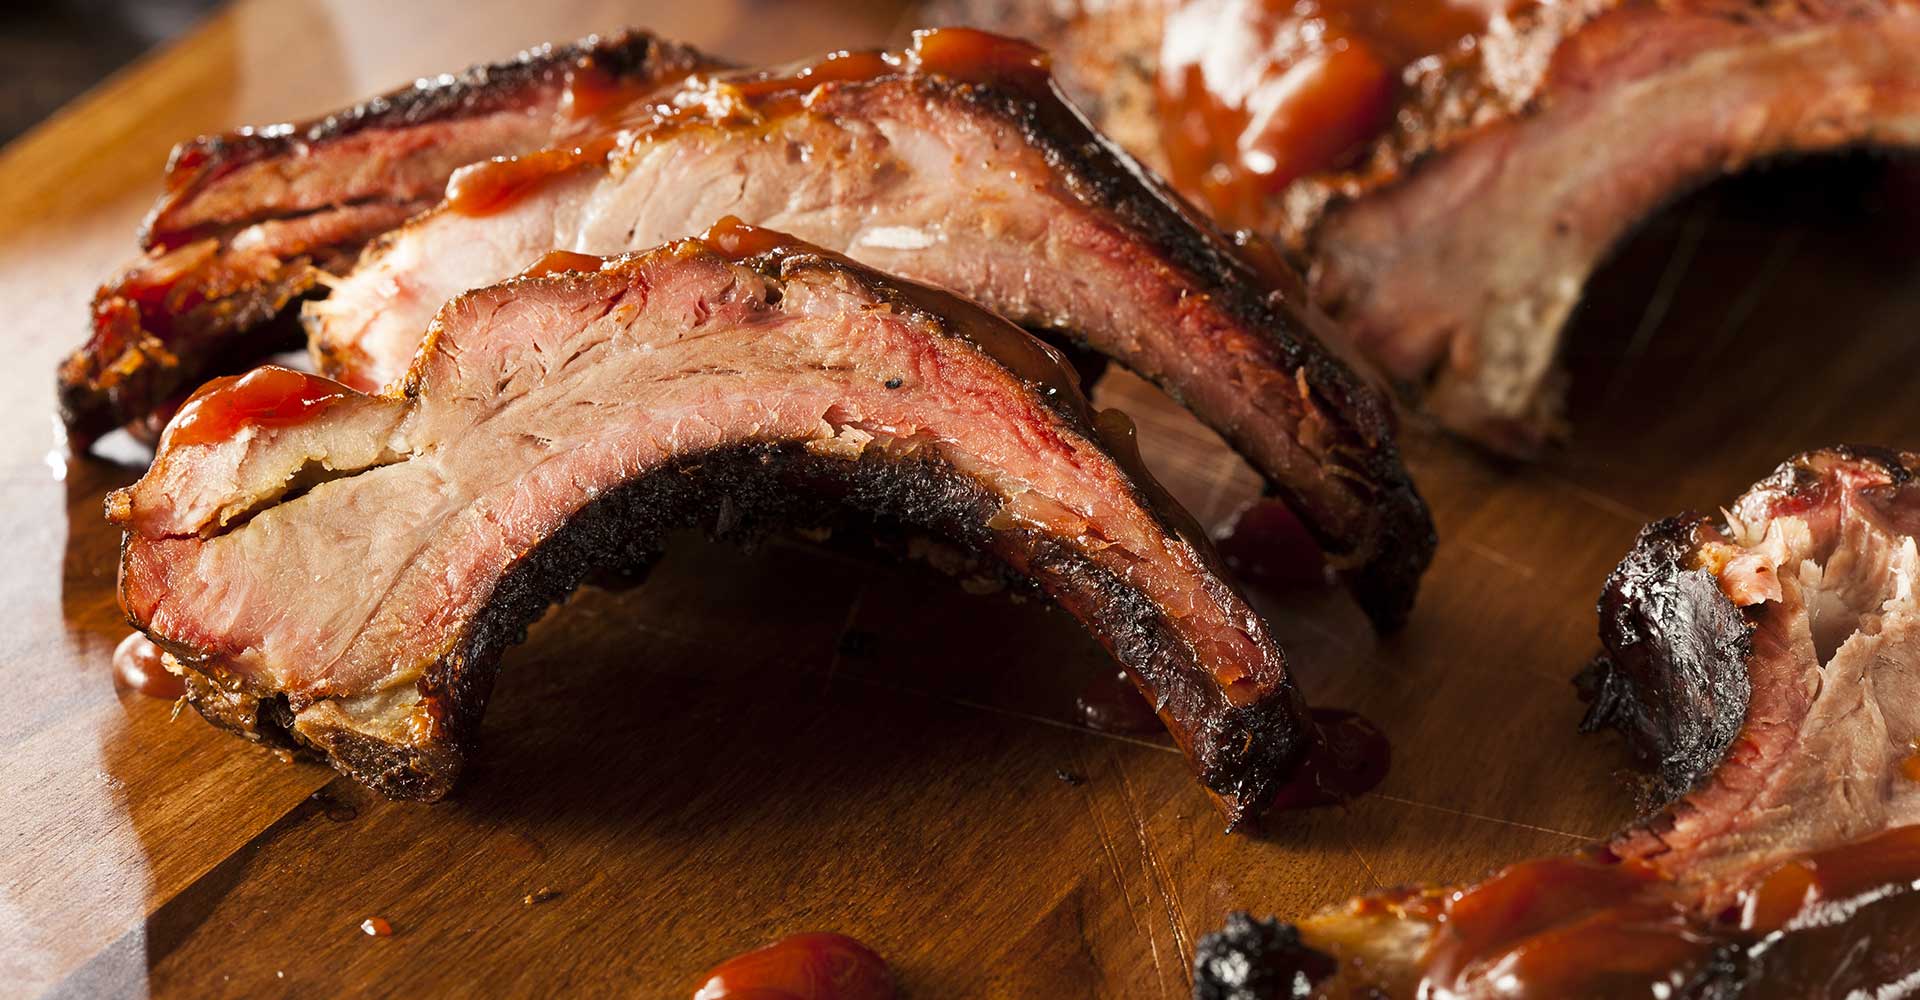 South County Best BBQ Ribs | BBQ chicken pulled pork whiskey bourbon bar